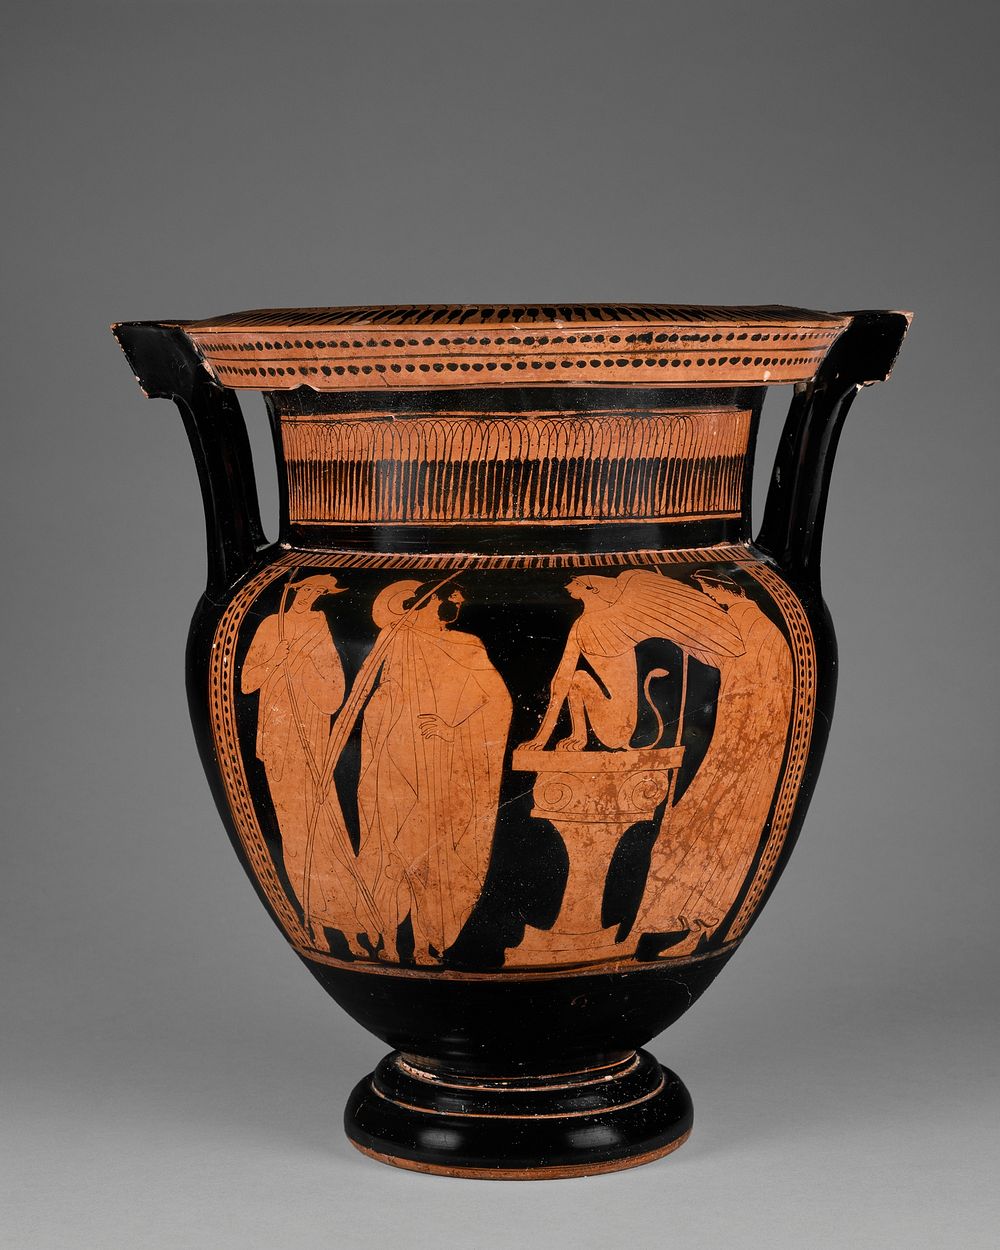 Attic Red-Figure Column Krater by Painter of London E489